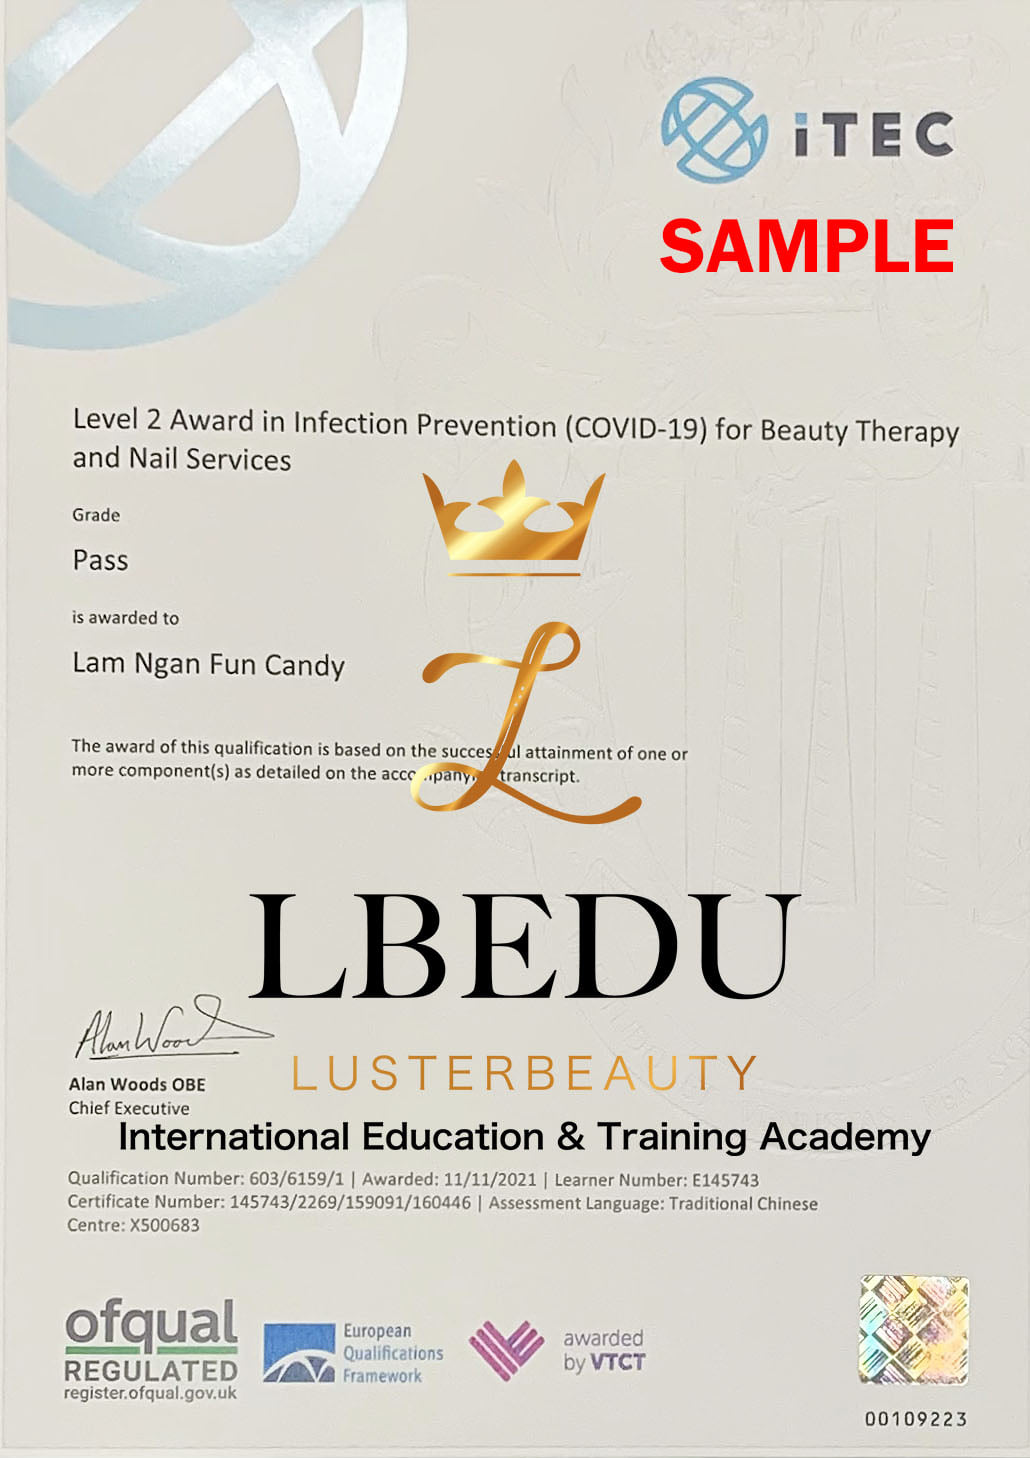 Luster Beauty LBEDU VTCT OFQUAL iTEC Level 2 Award in Infection Prevention (COVID-19) for Beauty Therapy and Nail Services sample certificate Level 2 AWARD 臨床美學國際預防感染 COVID19 國際資歷架構認證課程 RQF EQF